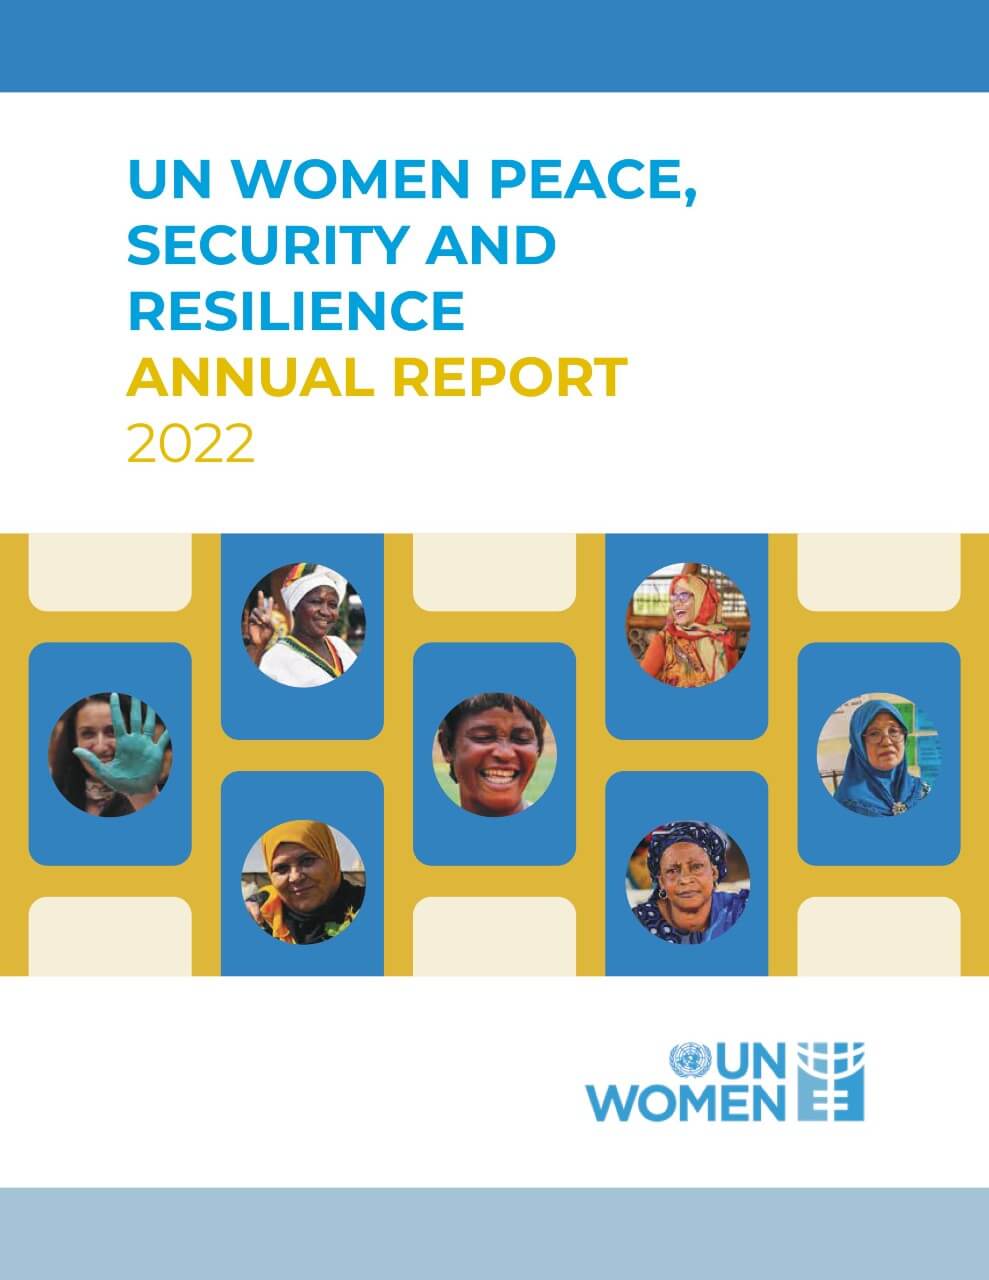 Women, peace and security annual report 2022